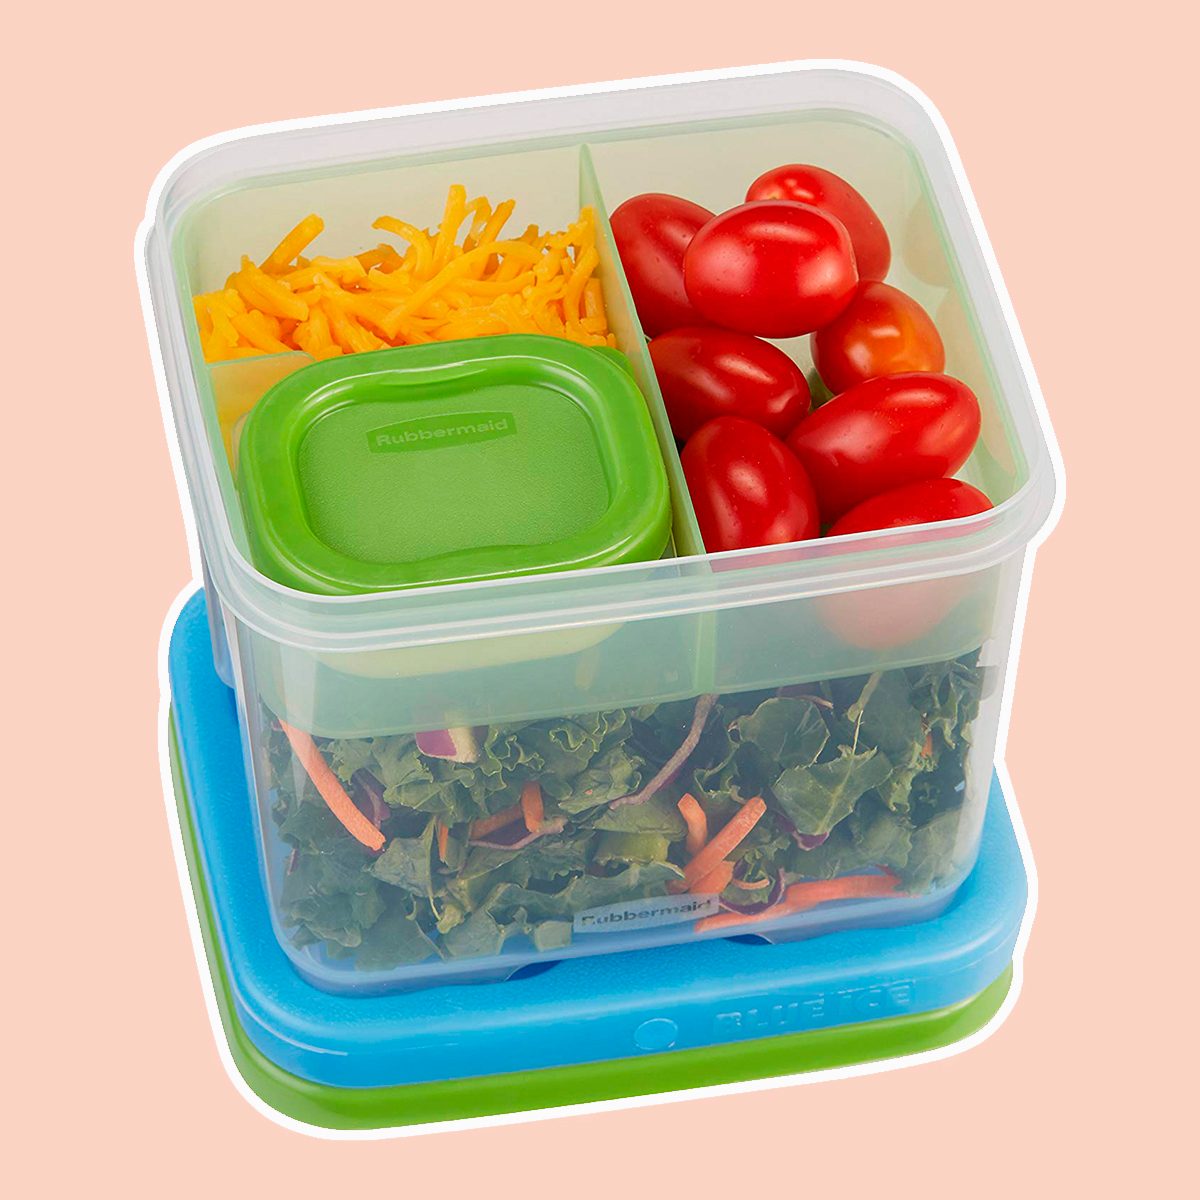 SALAD CONTAINER